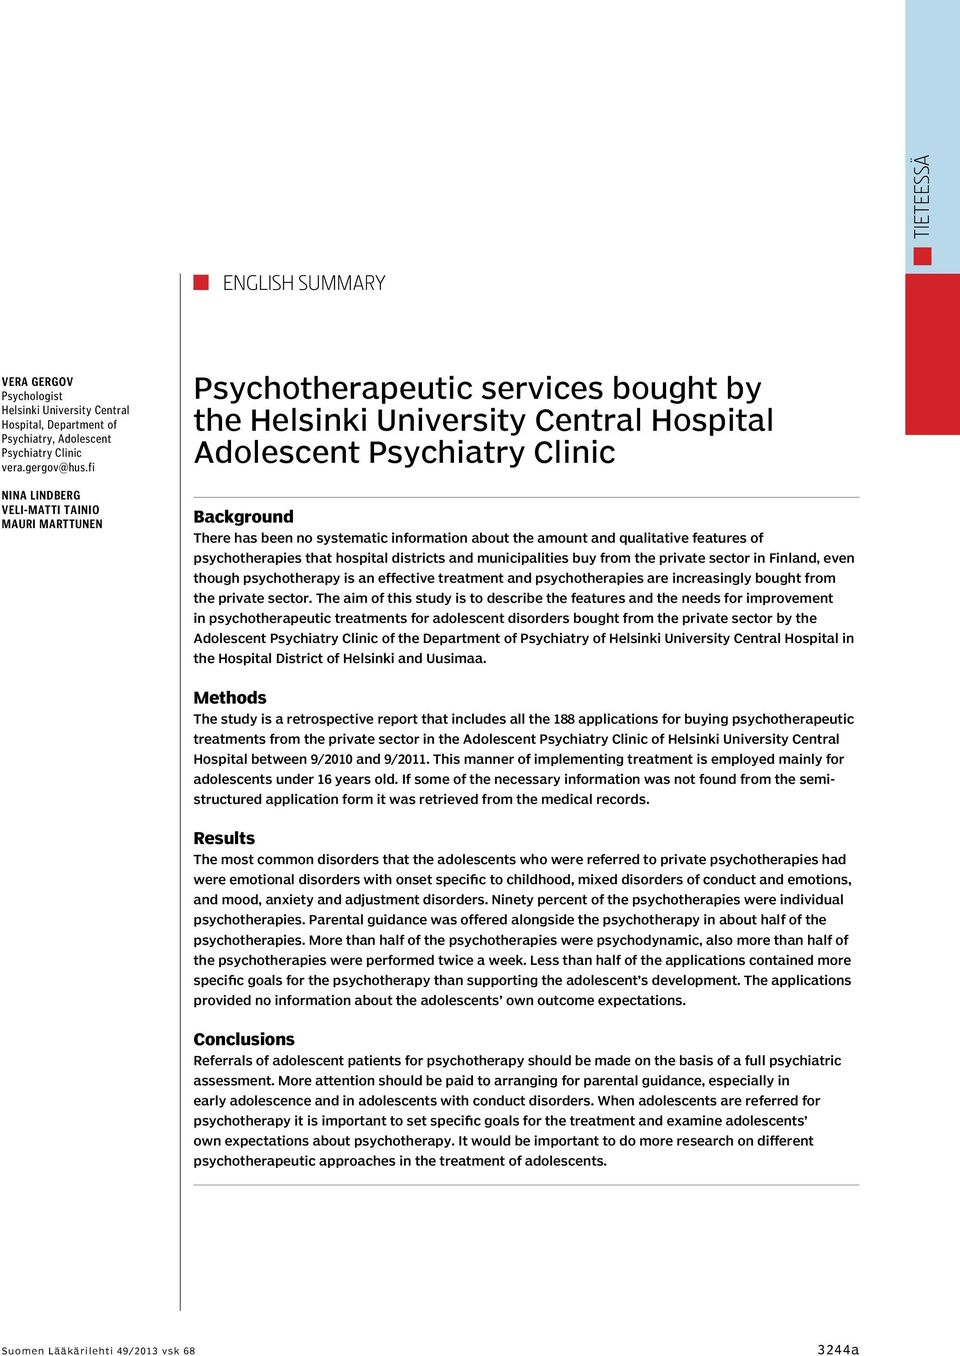 information about the amount and qualitative features of psychotherapies that hospital districts and municipalities buy from the private sector in Finland, even though psychotherapy is an effective